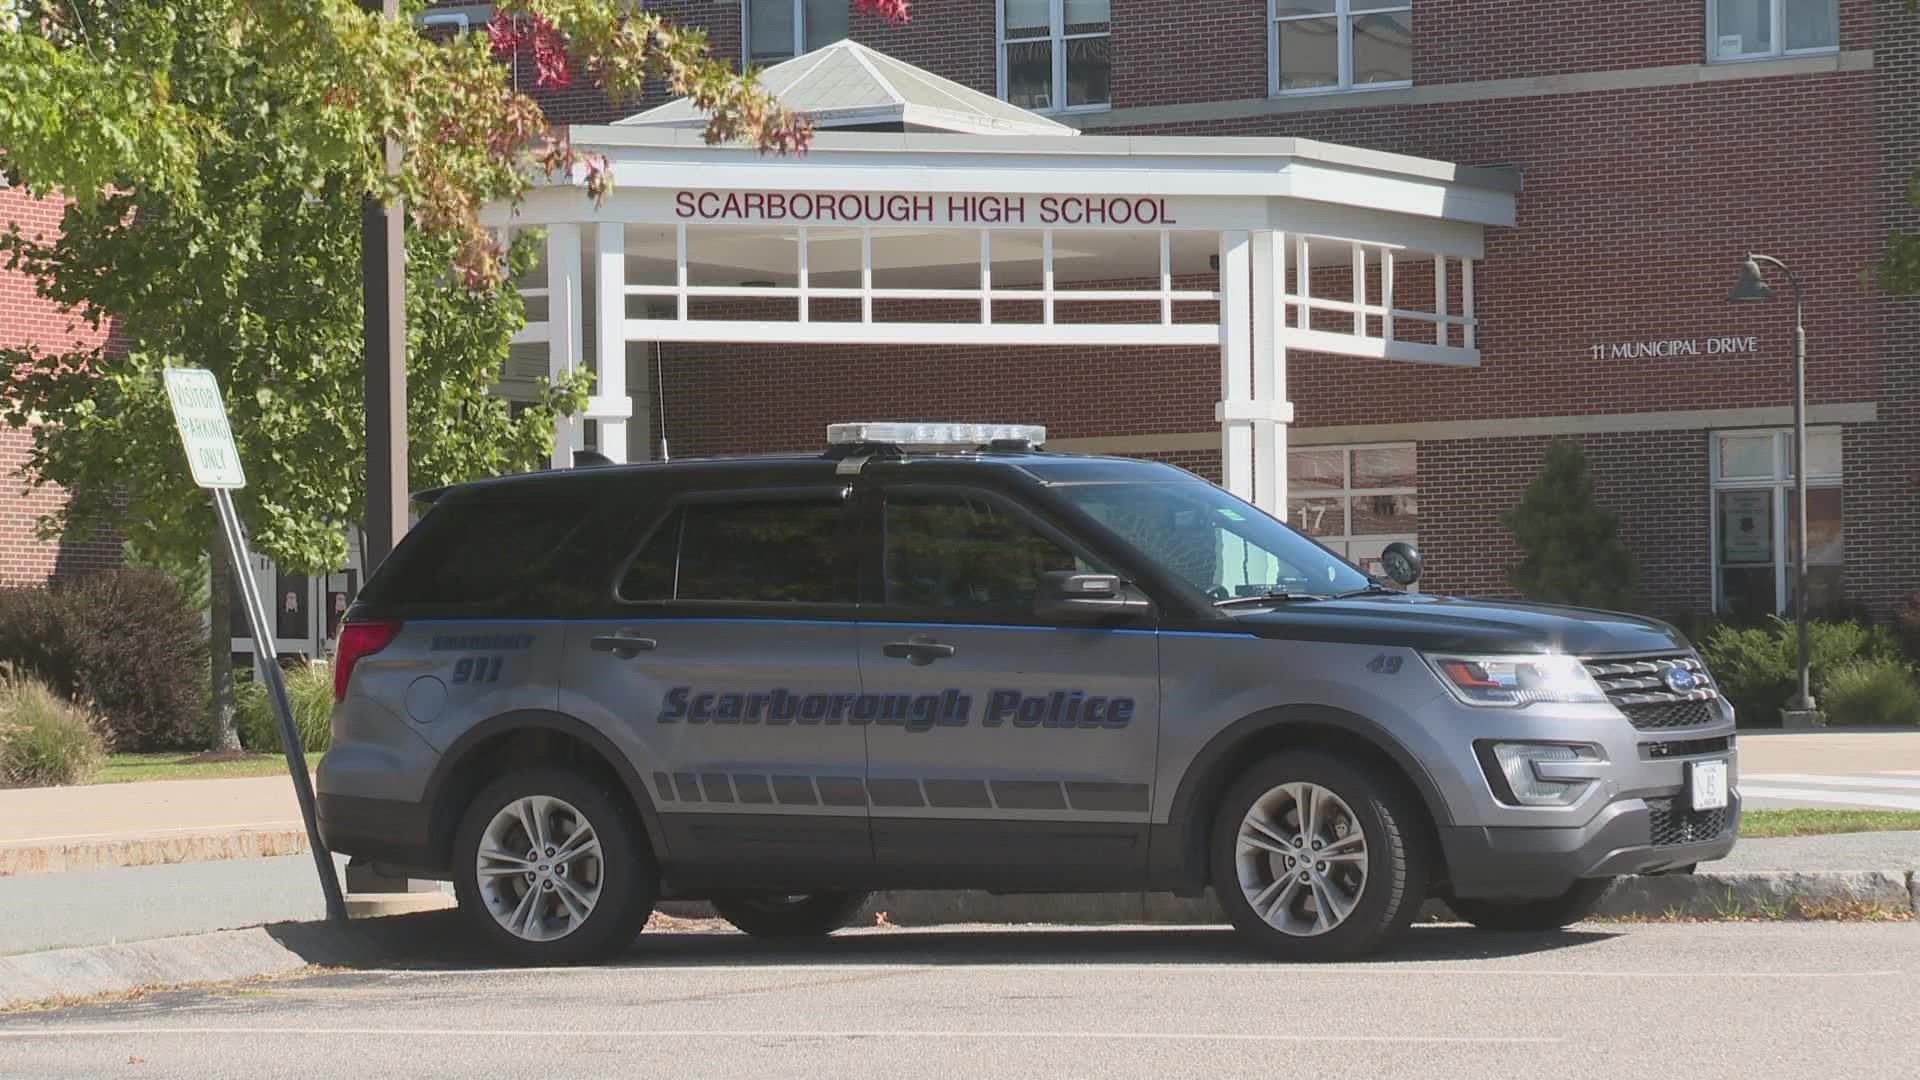 Scarborough police alerted school officials of the threat Monday evening.